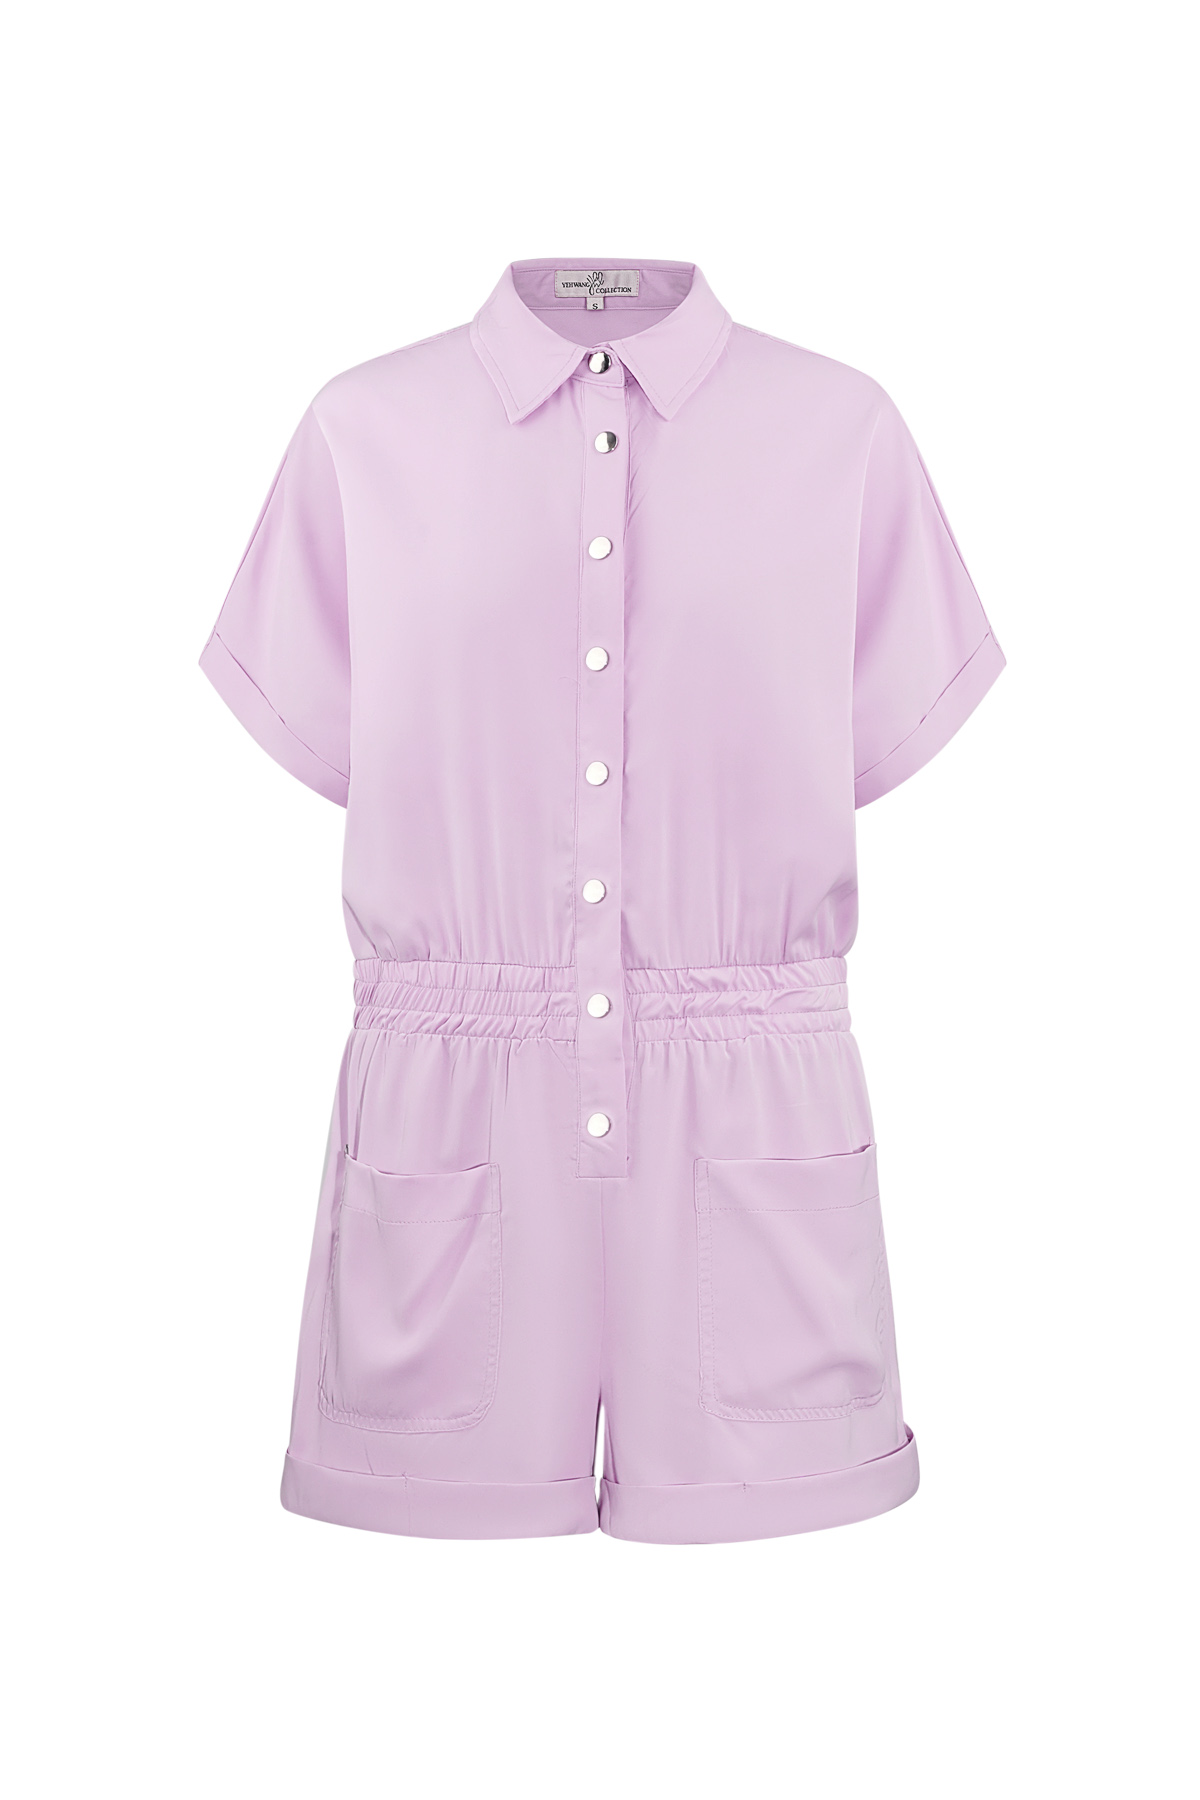 Farbenfroher Playsuit - lila